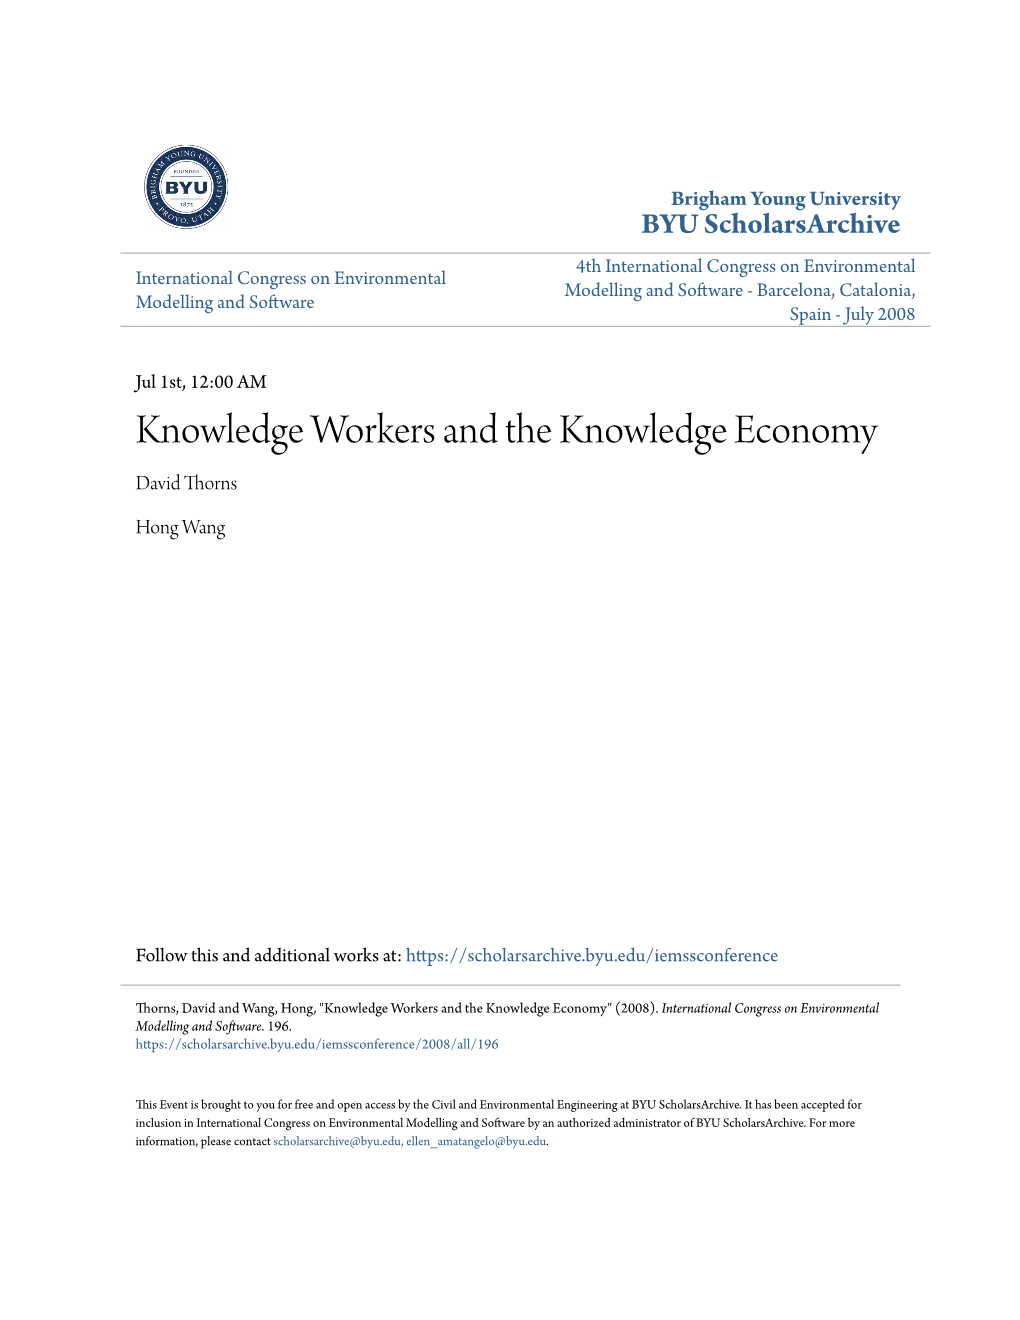 Knowledge Workers and the Knowledge Economy David Thorns